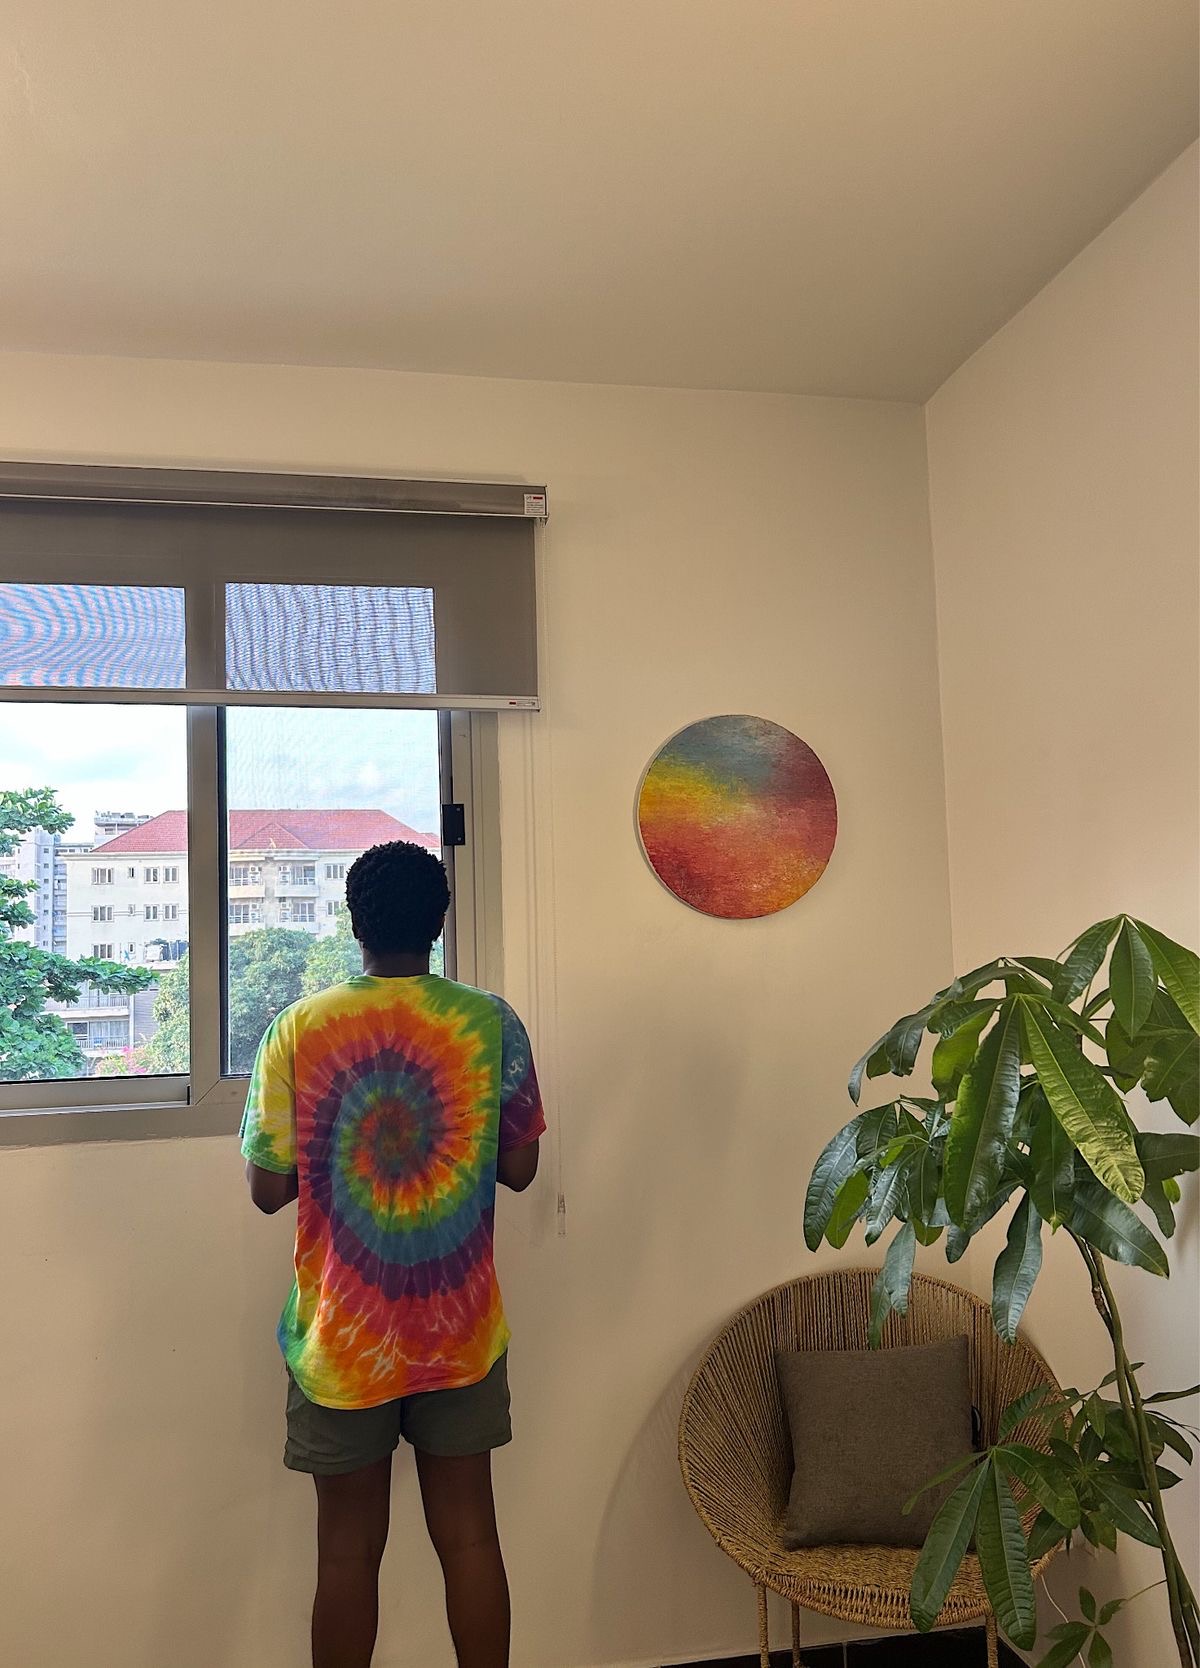 Picture of Tomiwa in a tie and dye taken by Mofope